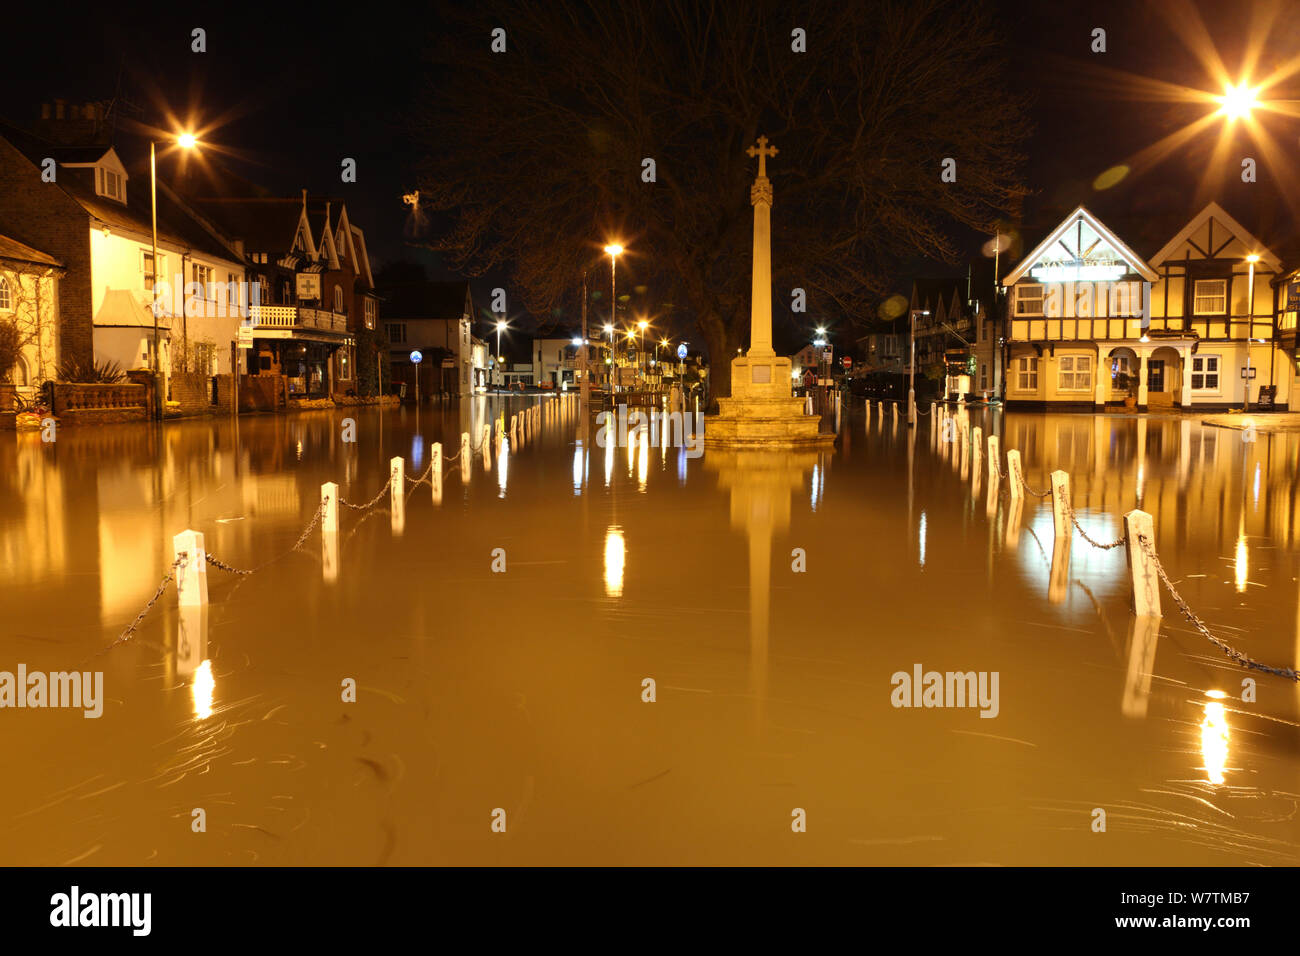 Flooded town of Datchet at night during February 2014 flooding, Berkshire, England, UK, 11th Februay 2014. Stock Photo